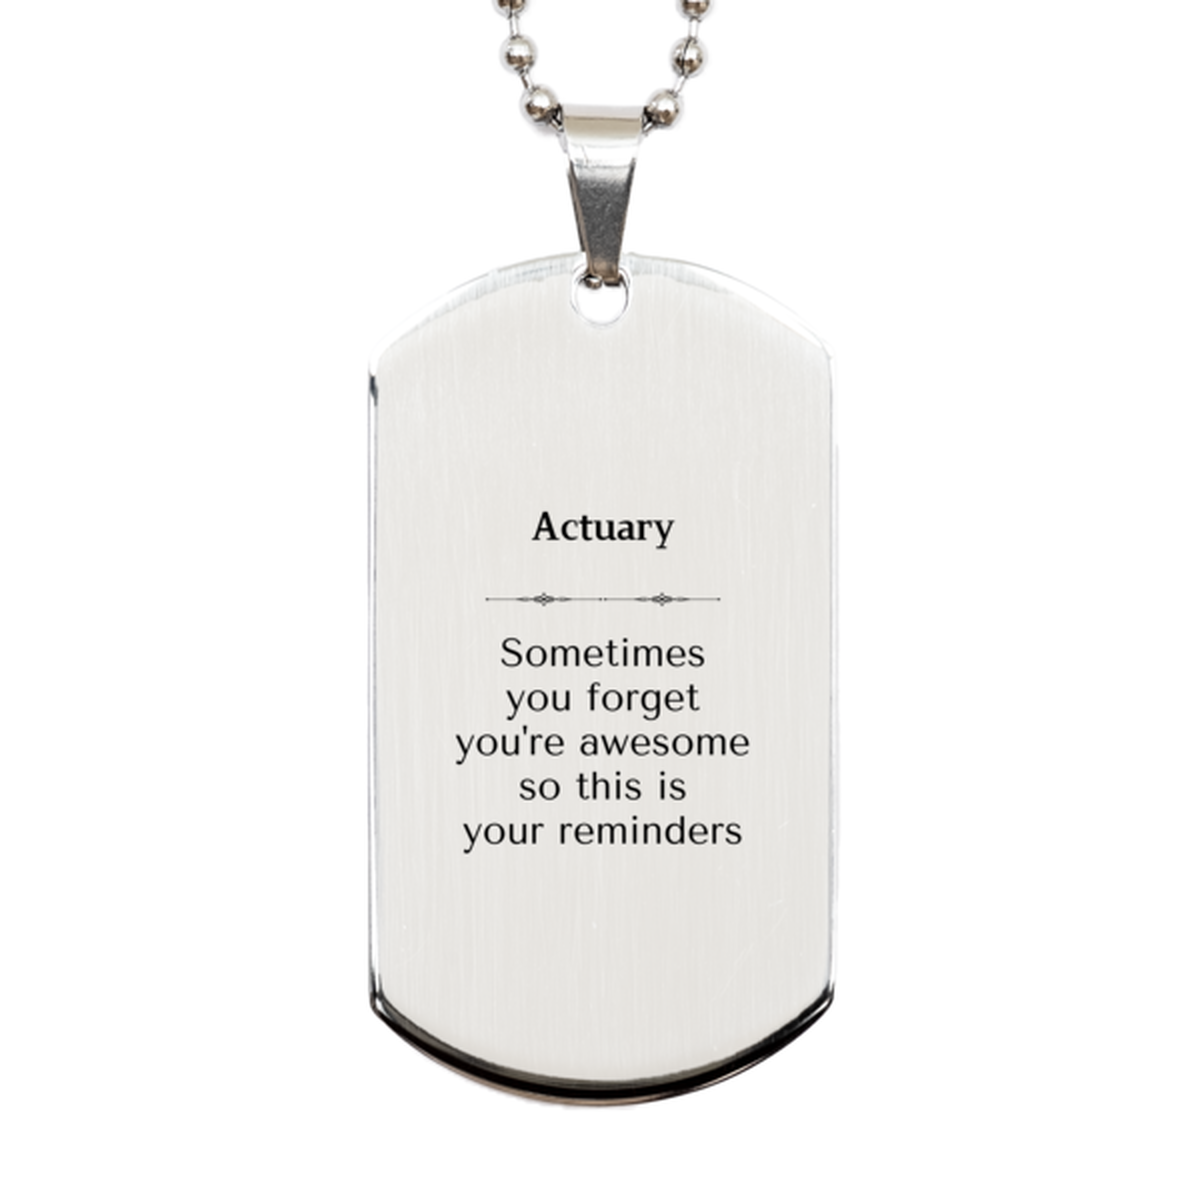 Sentimental Actuary Silver Dog Tag, Actuary Sometimes you forget you're awesome so this is your reminders, Graduation Christmas Birthday Gifts for Actuary, Men, Women, Coworkers